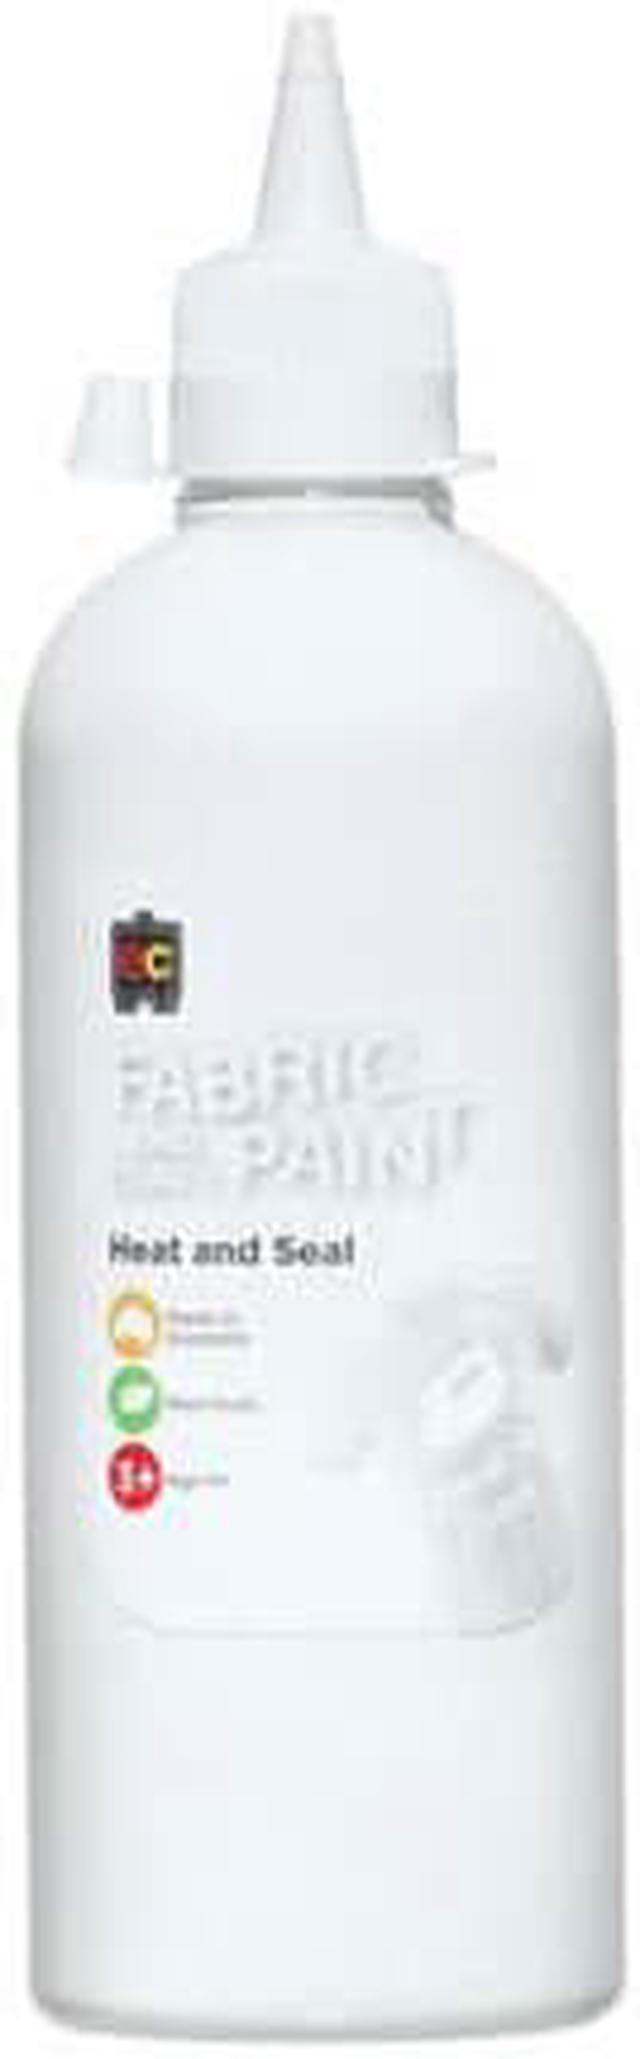 Art & Craft - EC FABRIC AND CRAFT PAINT 500ml White - Your Home